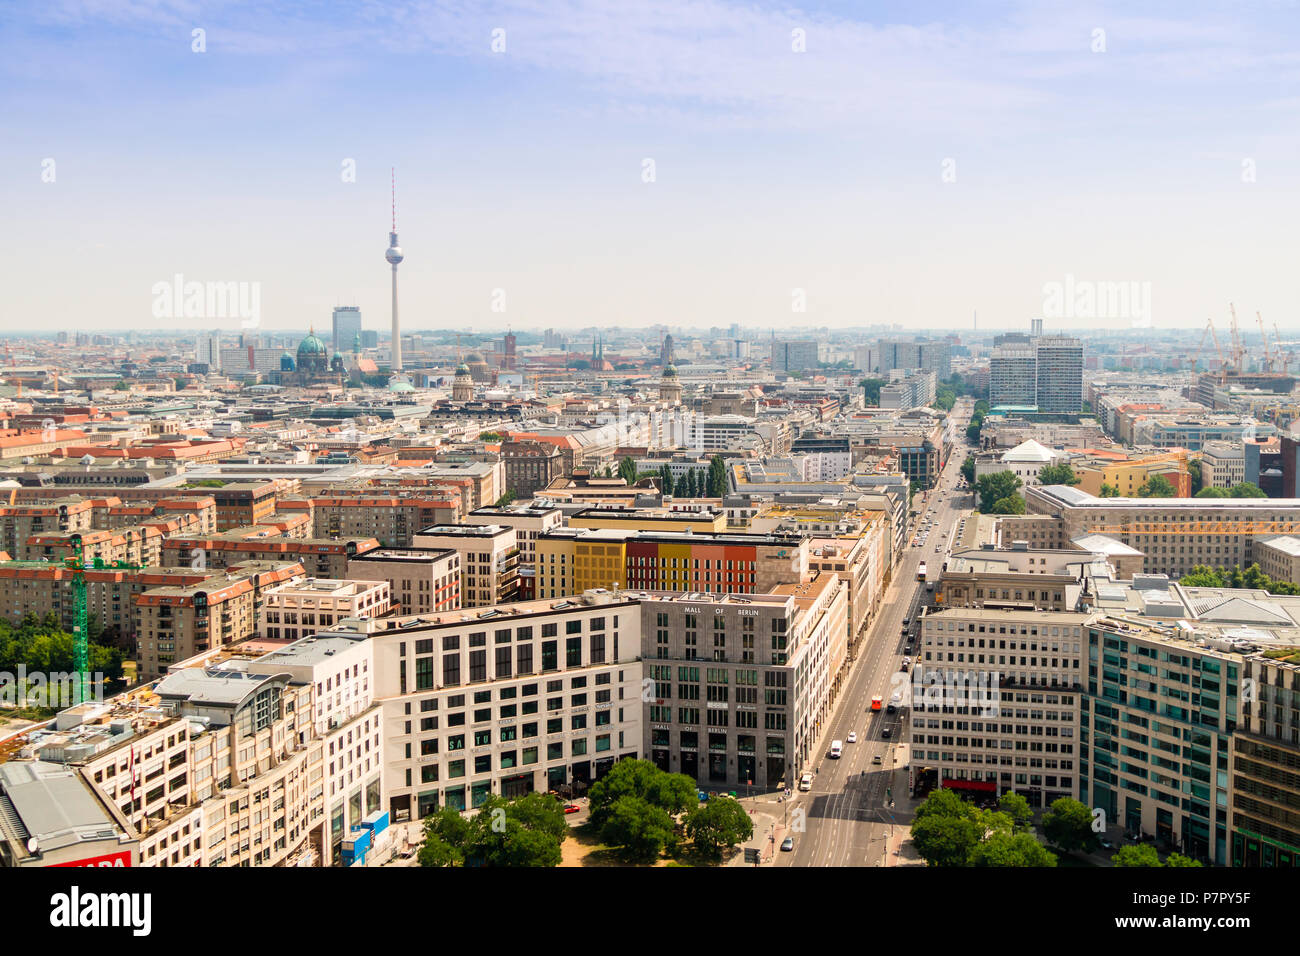 Aerial view of Leipziger street, one of the major streets in Berlin, connects West and East side. Stock Photo